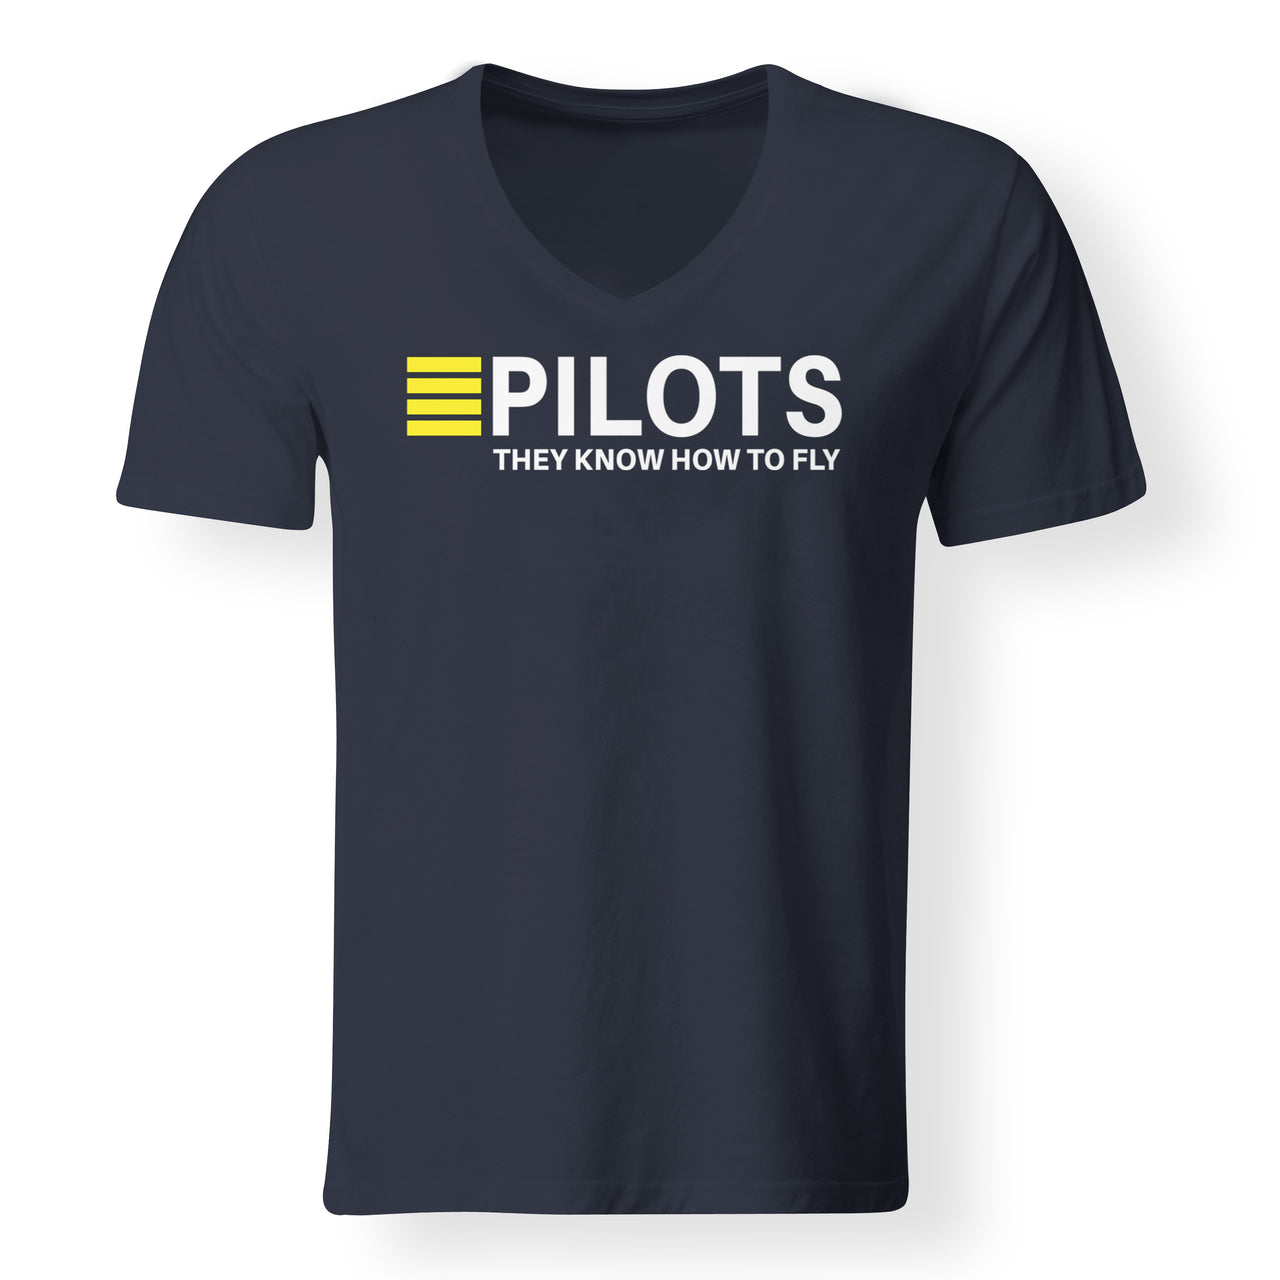 Pilots They Know How To Fly Designed V-Neck T-Shirts